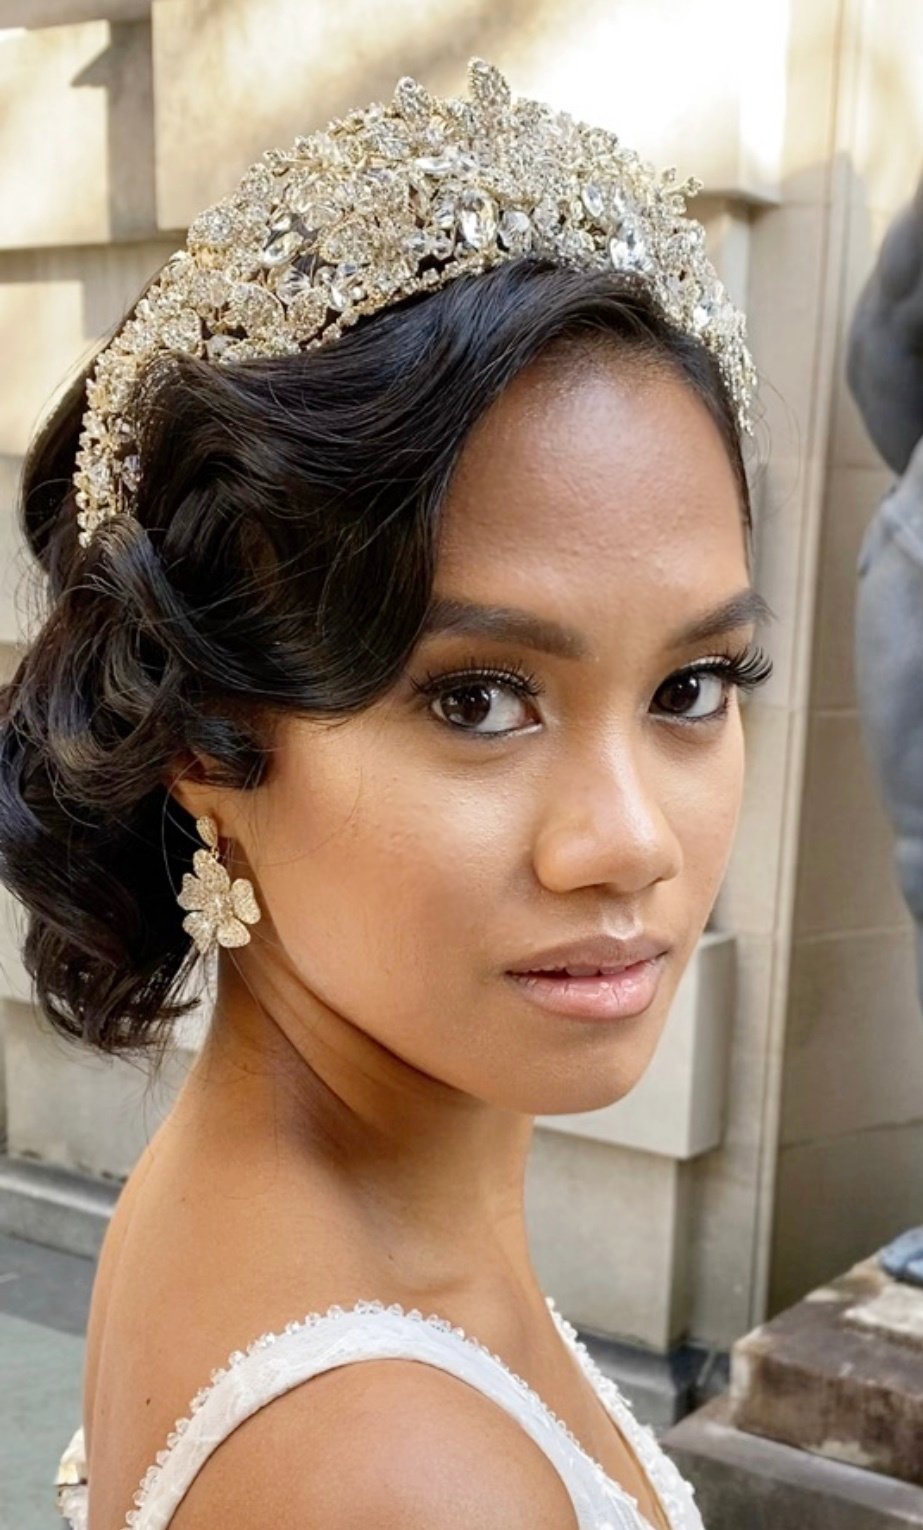 Wedding Crowns and Tiaras: Wear Them With (or Without) a Veil